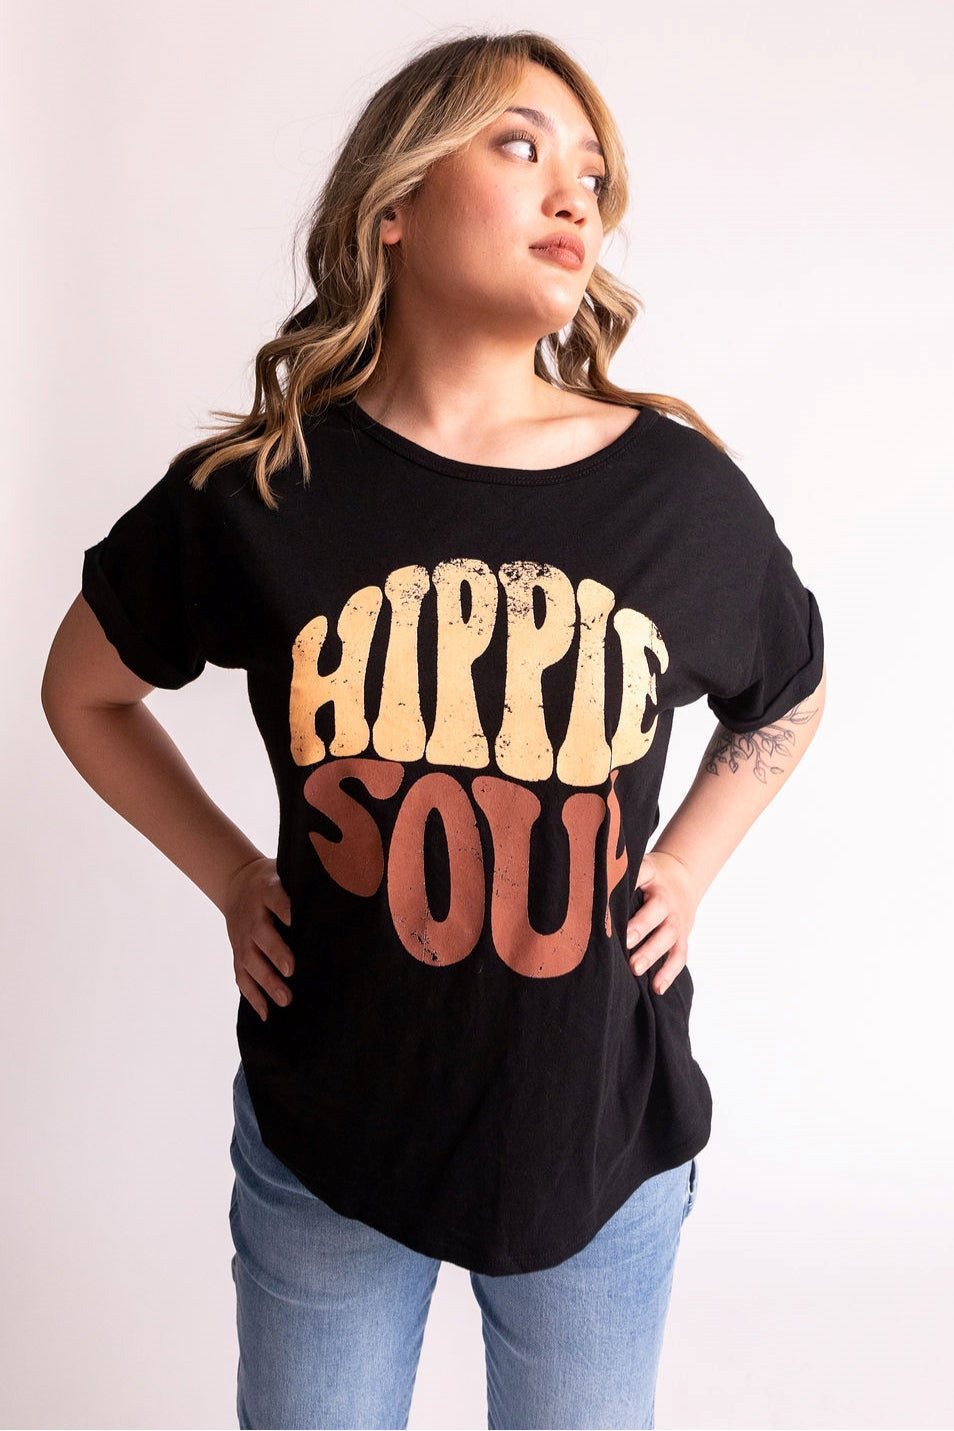 HIPPIE SOUL Graphic Tee - Expressive Collective CO.